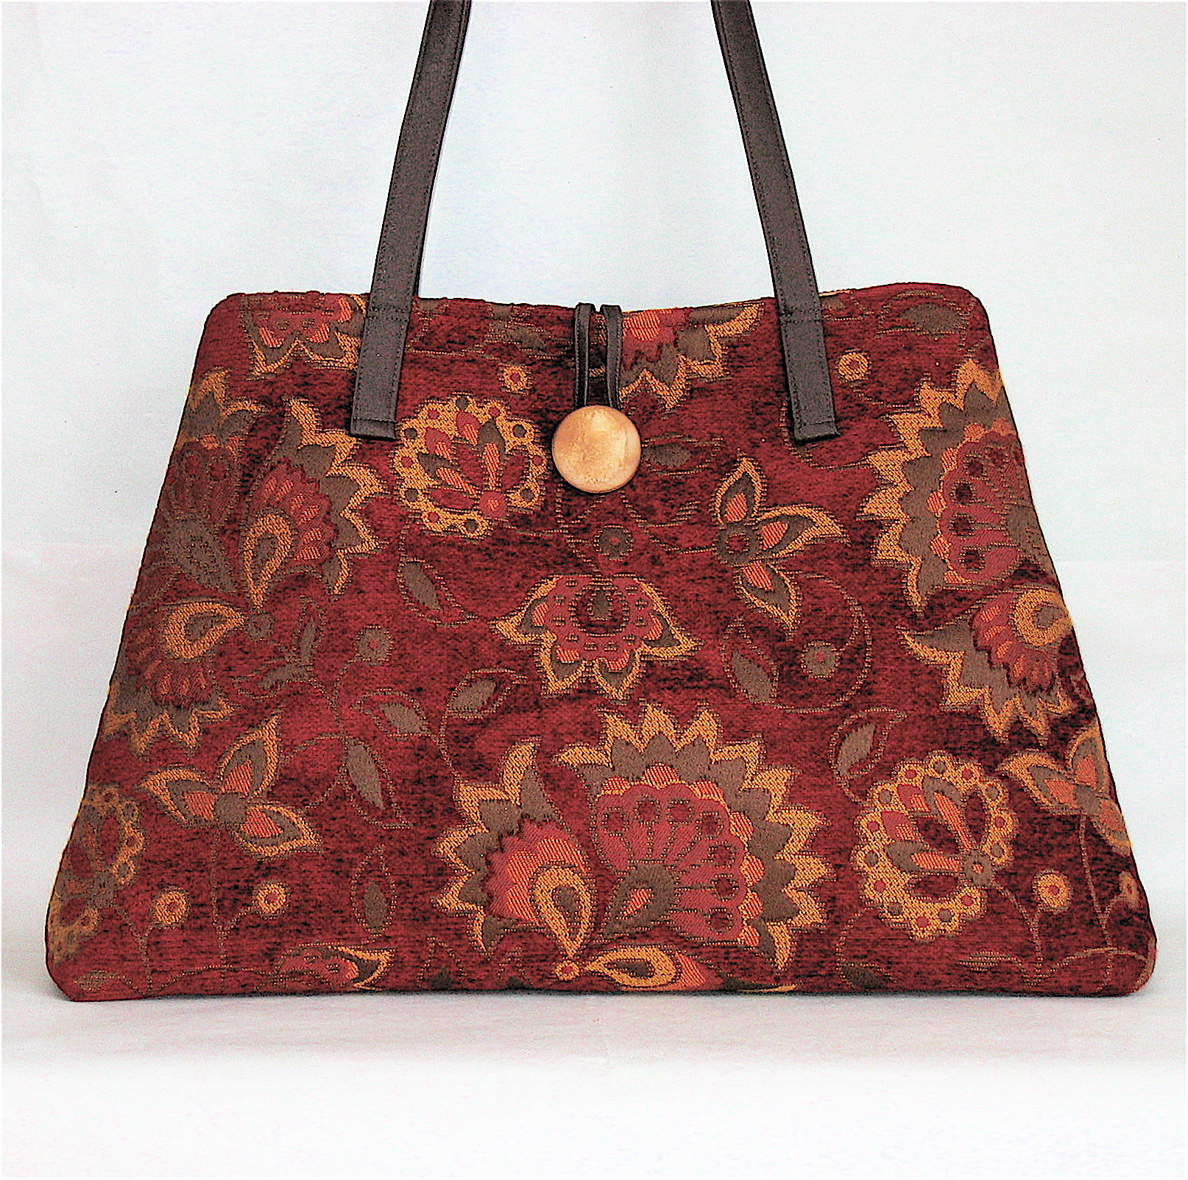 Rich Red Tapestry Tote Bag – Sewing Projects | BurdaStyle.com